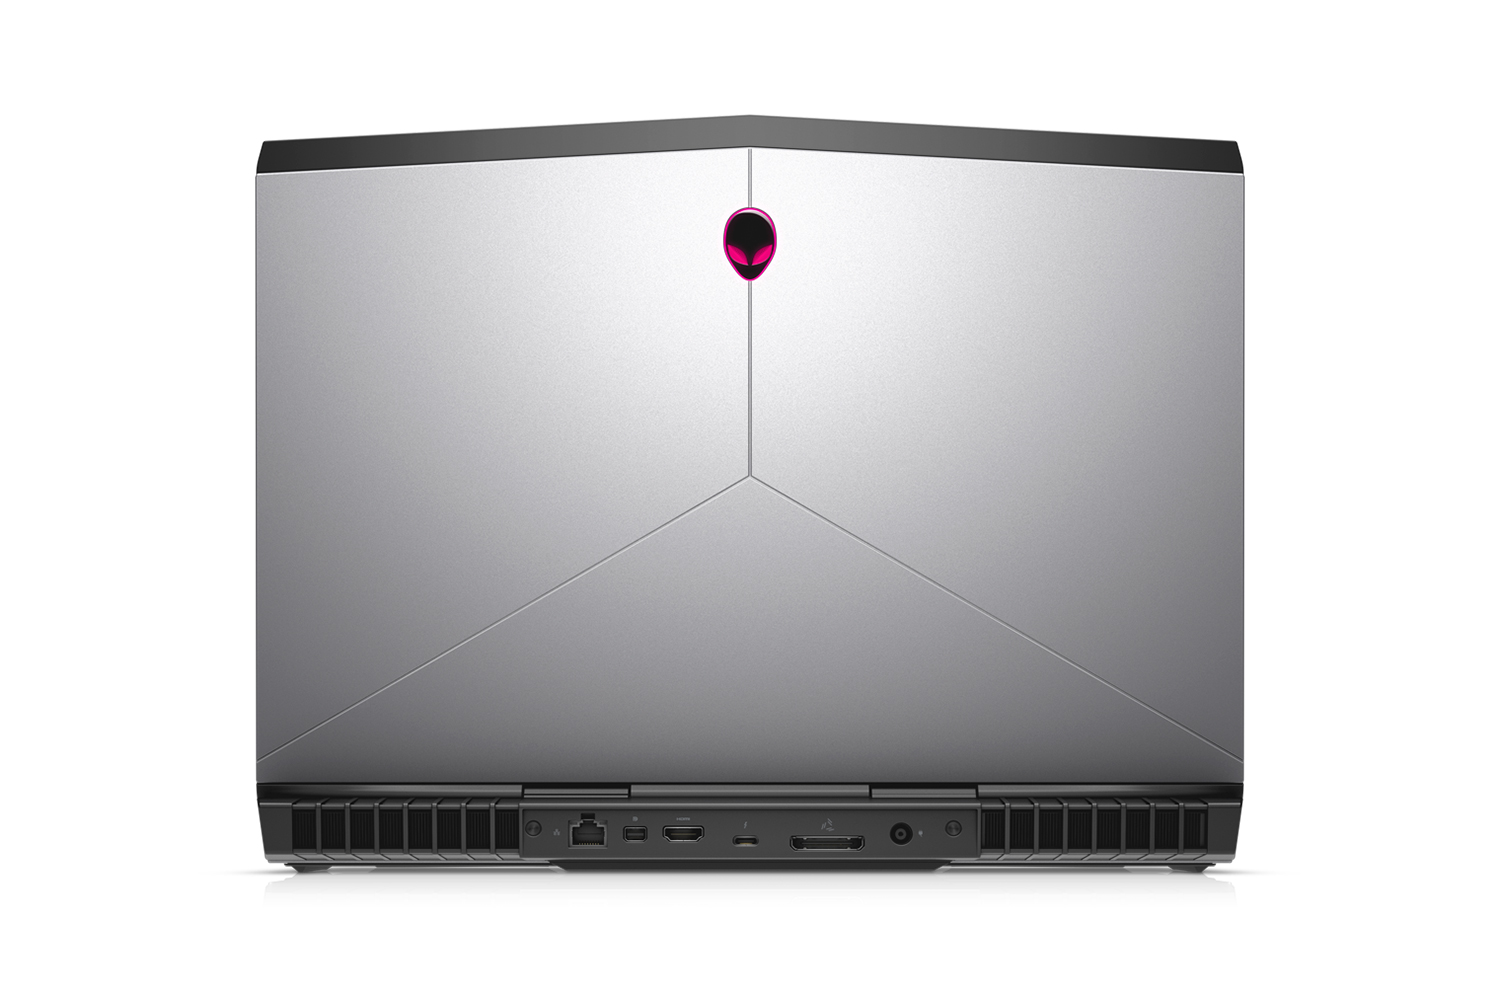 dell alienware inspiron 7000 gaming laptops refresh intel seventh gen cpu aw 15 08